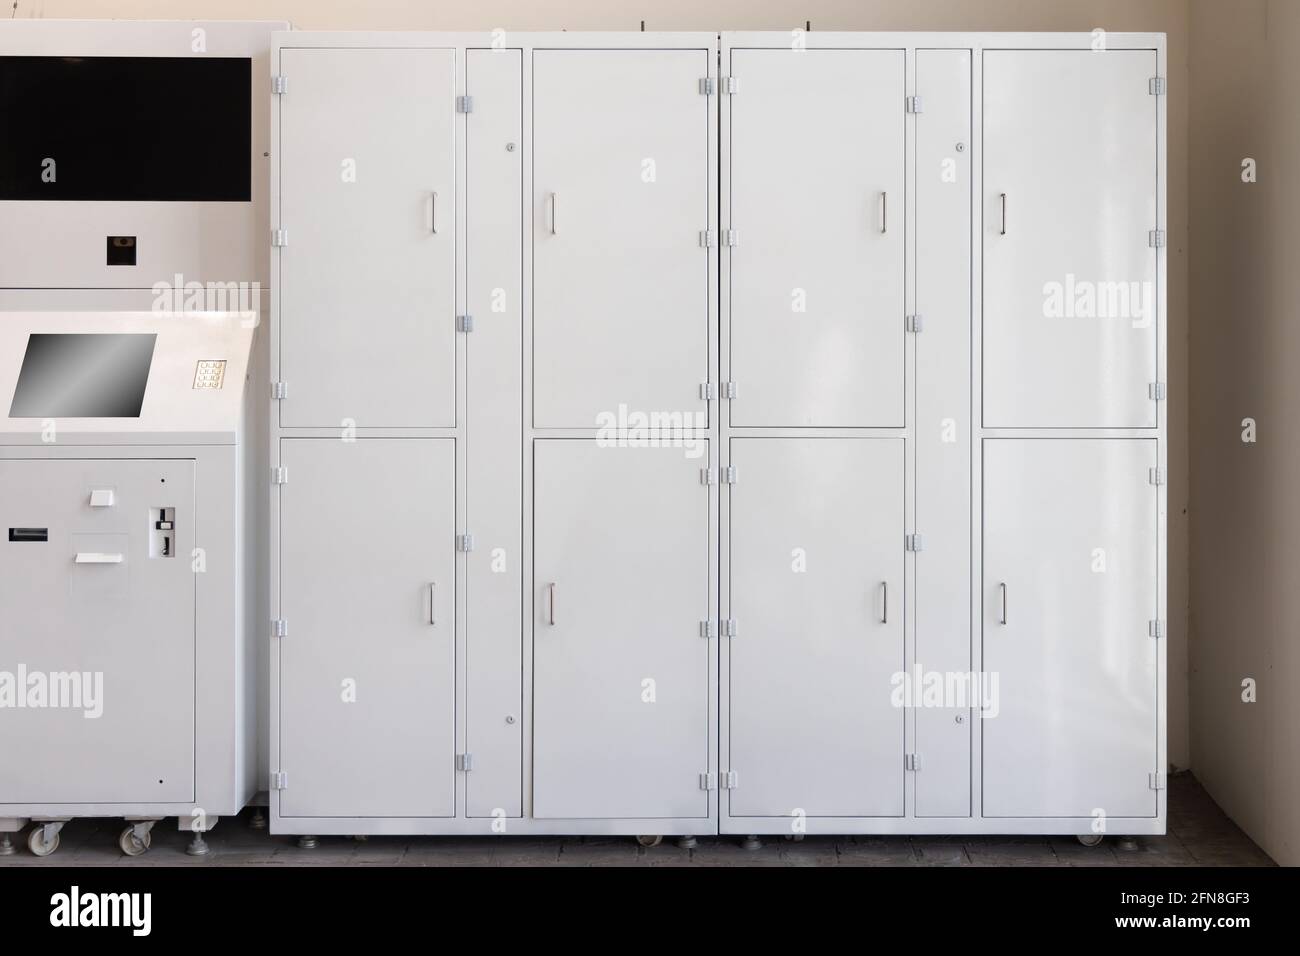 hi-res Alamy images and - photography lockers stock Steel